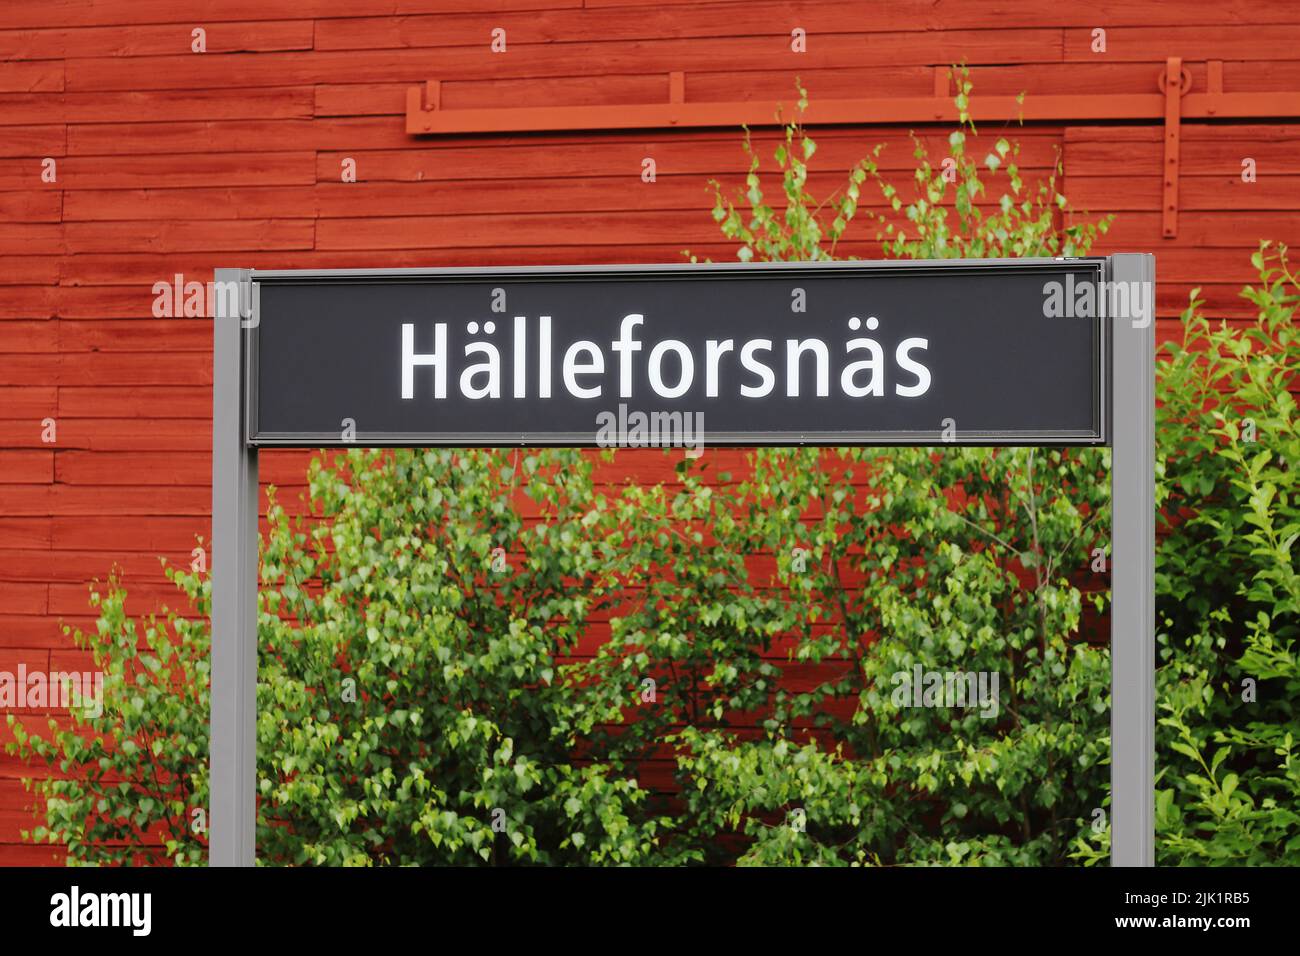 Close-up view of the Hallaforsnas village railroad station sign. Stock Photo